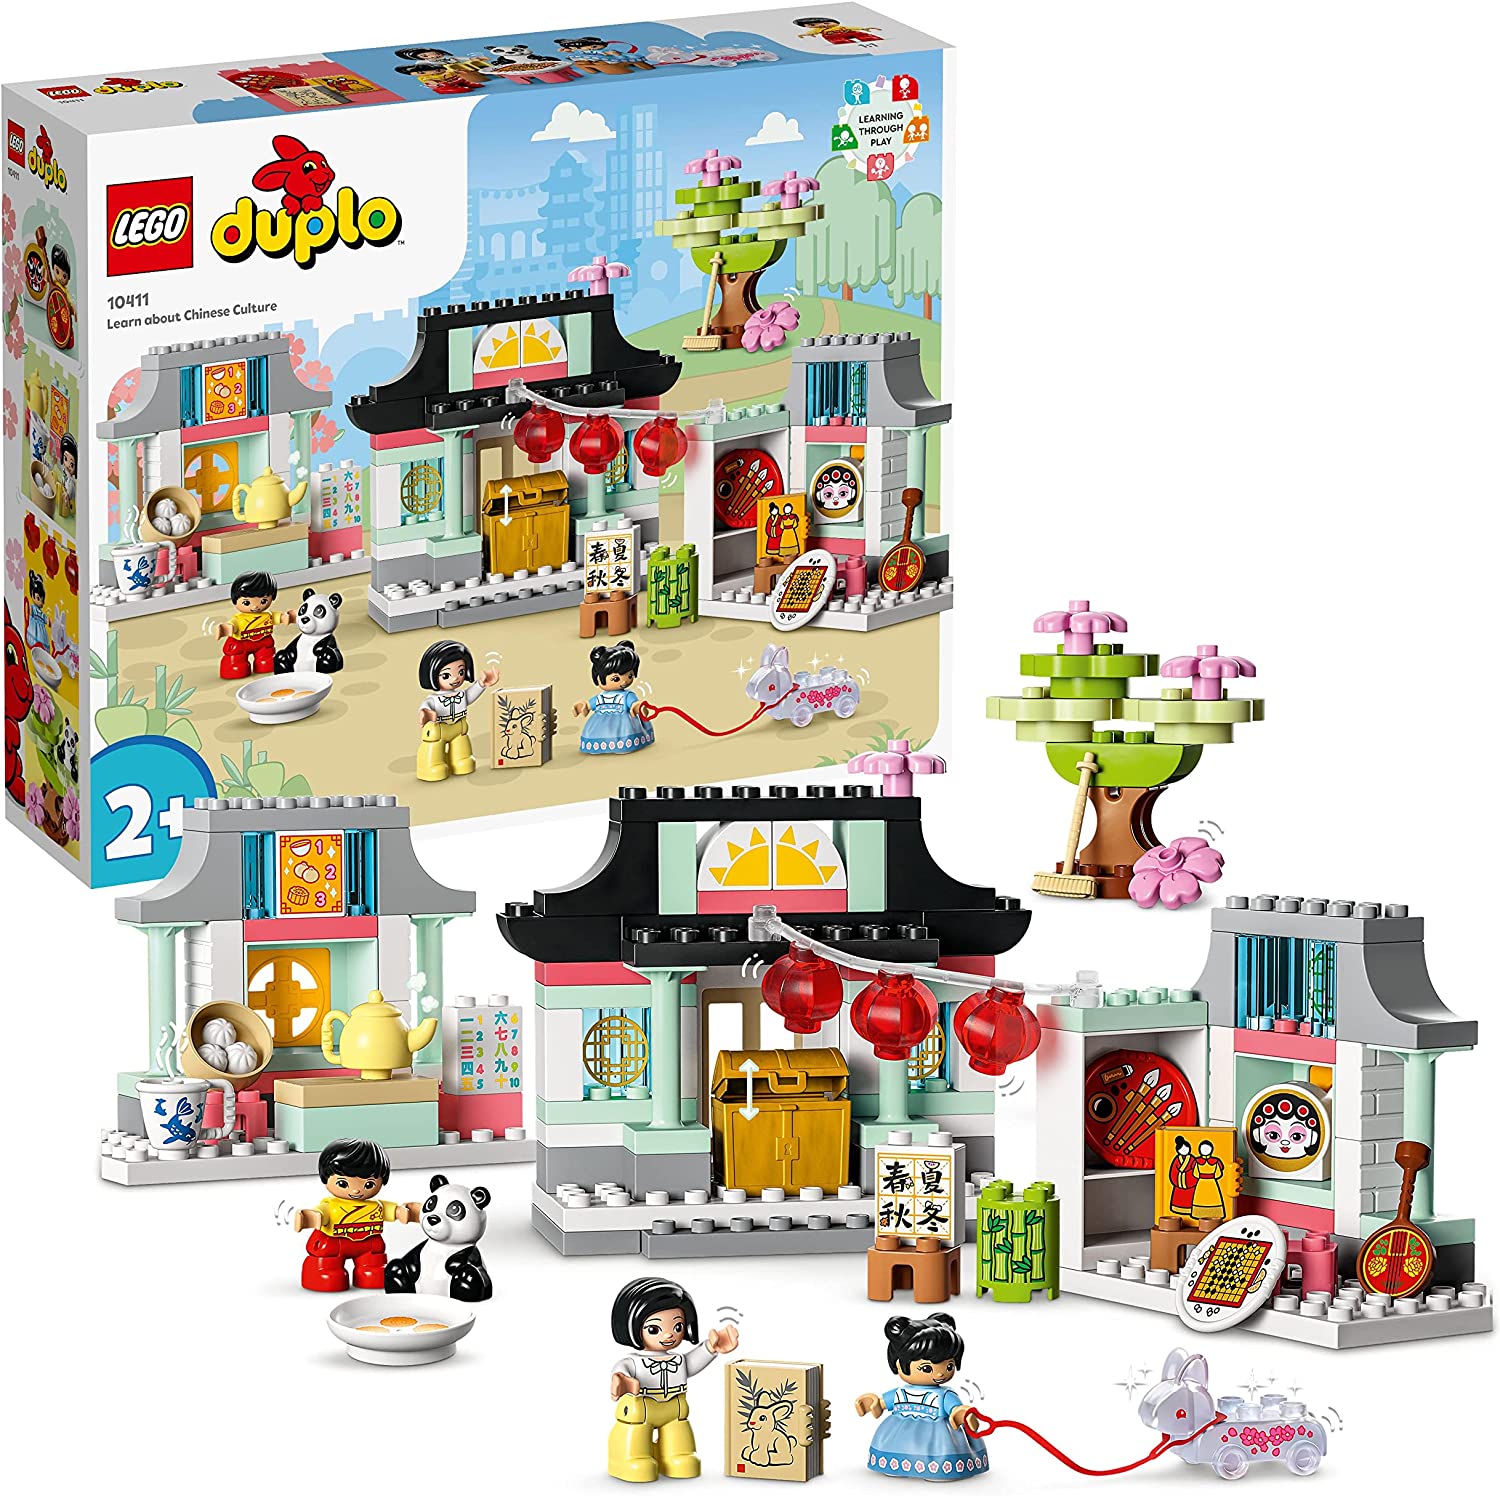 LEGO 10411 DUPLO TOPN Learn About Chinese Culture, Educational Toy for Toddlers from 2 years, with figures, Toy Panda and Stones